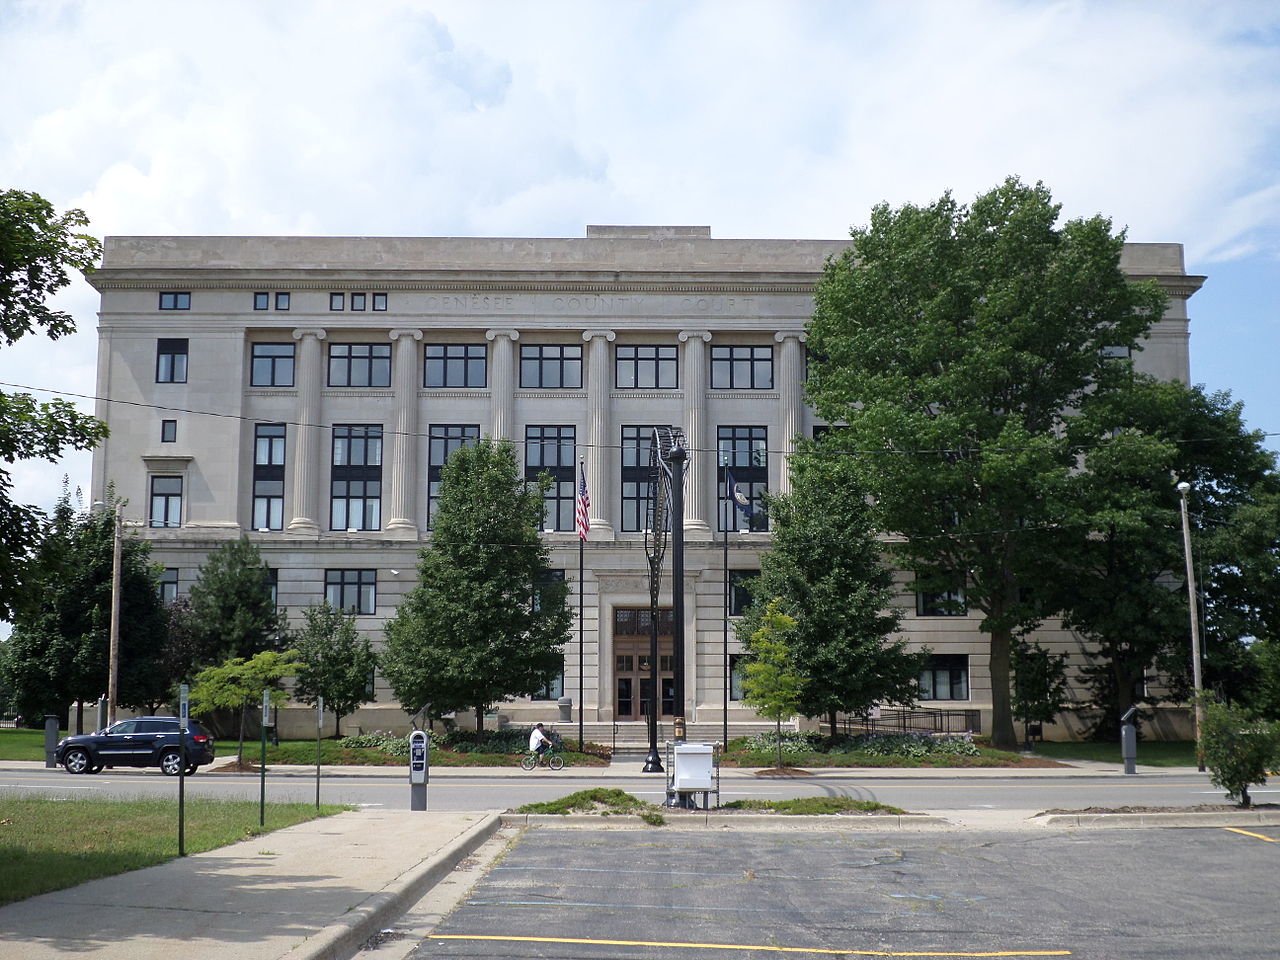 exterior of courthouse at end of street with trees in front of it